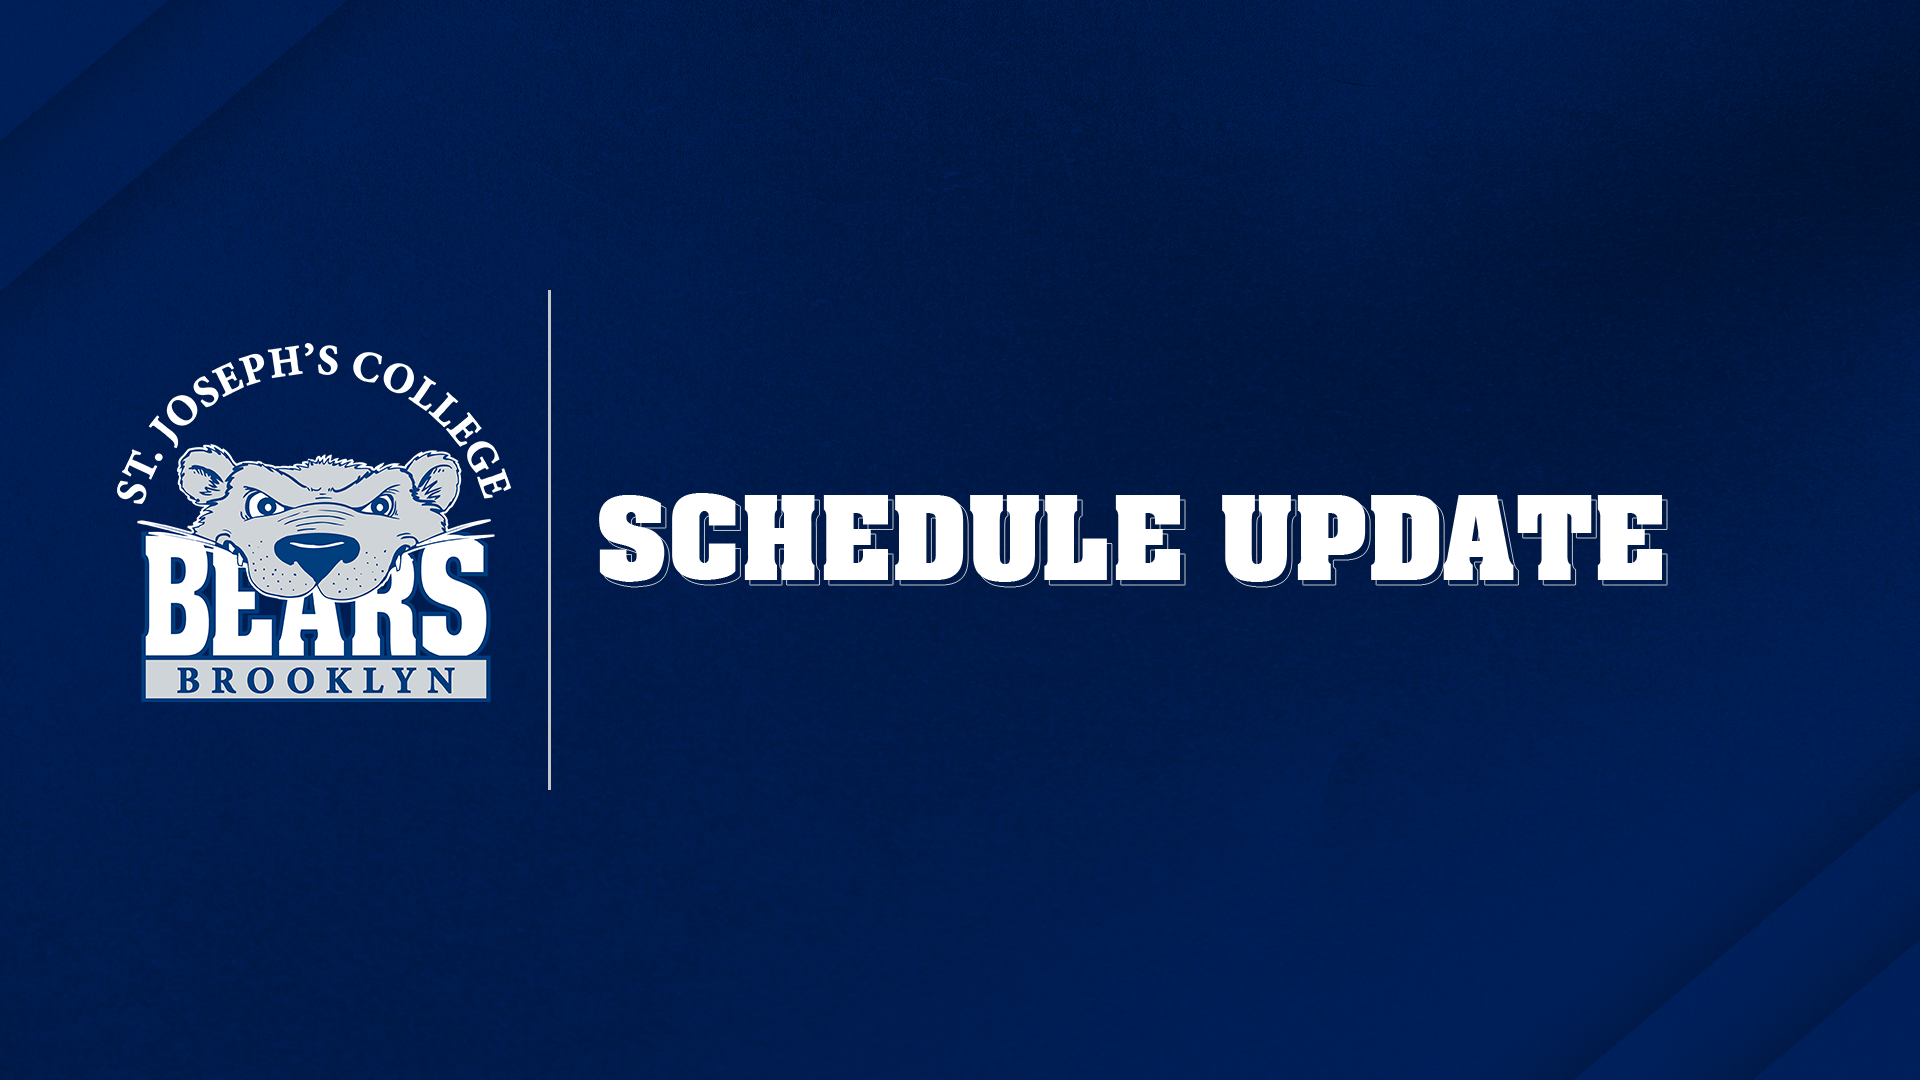 Schedule Updates to Men's Soccer, Women's Volleyball, and Women's Soccer